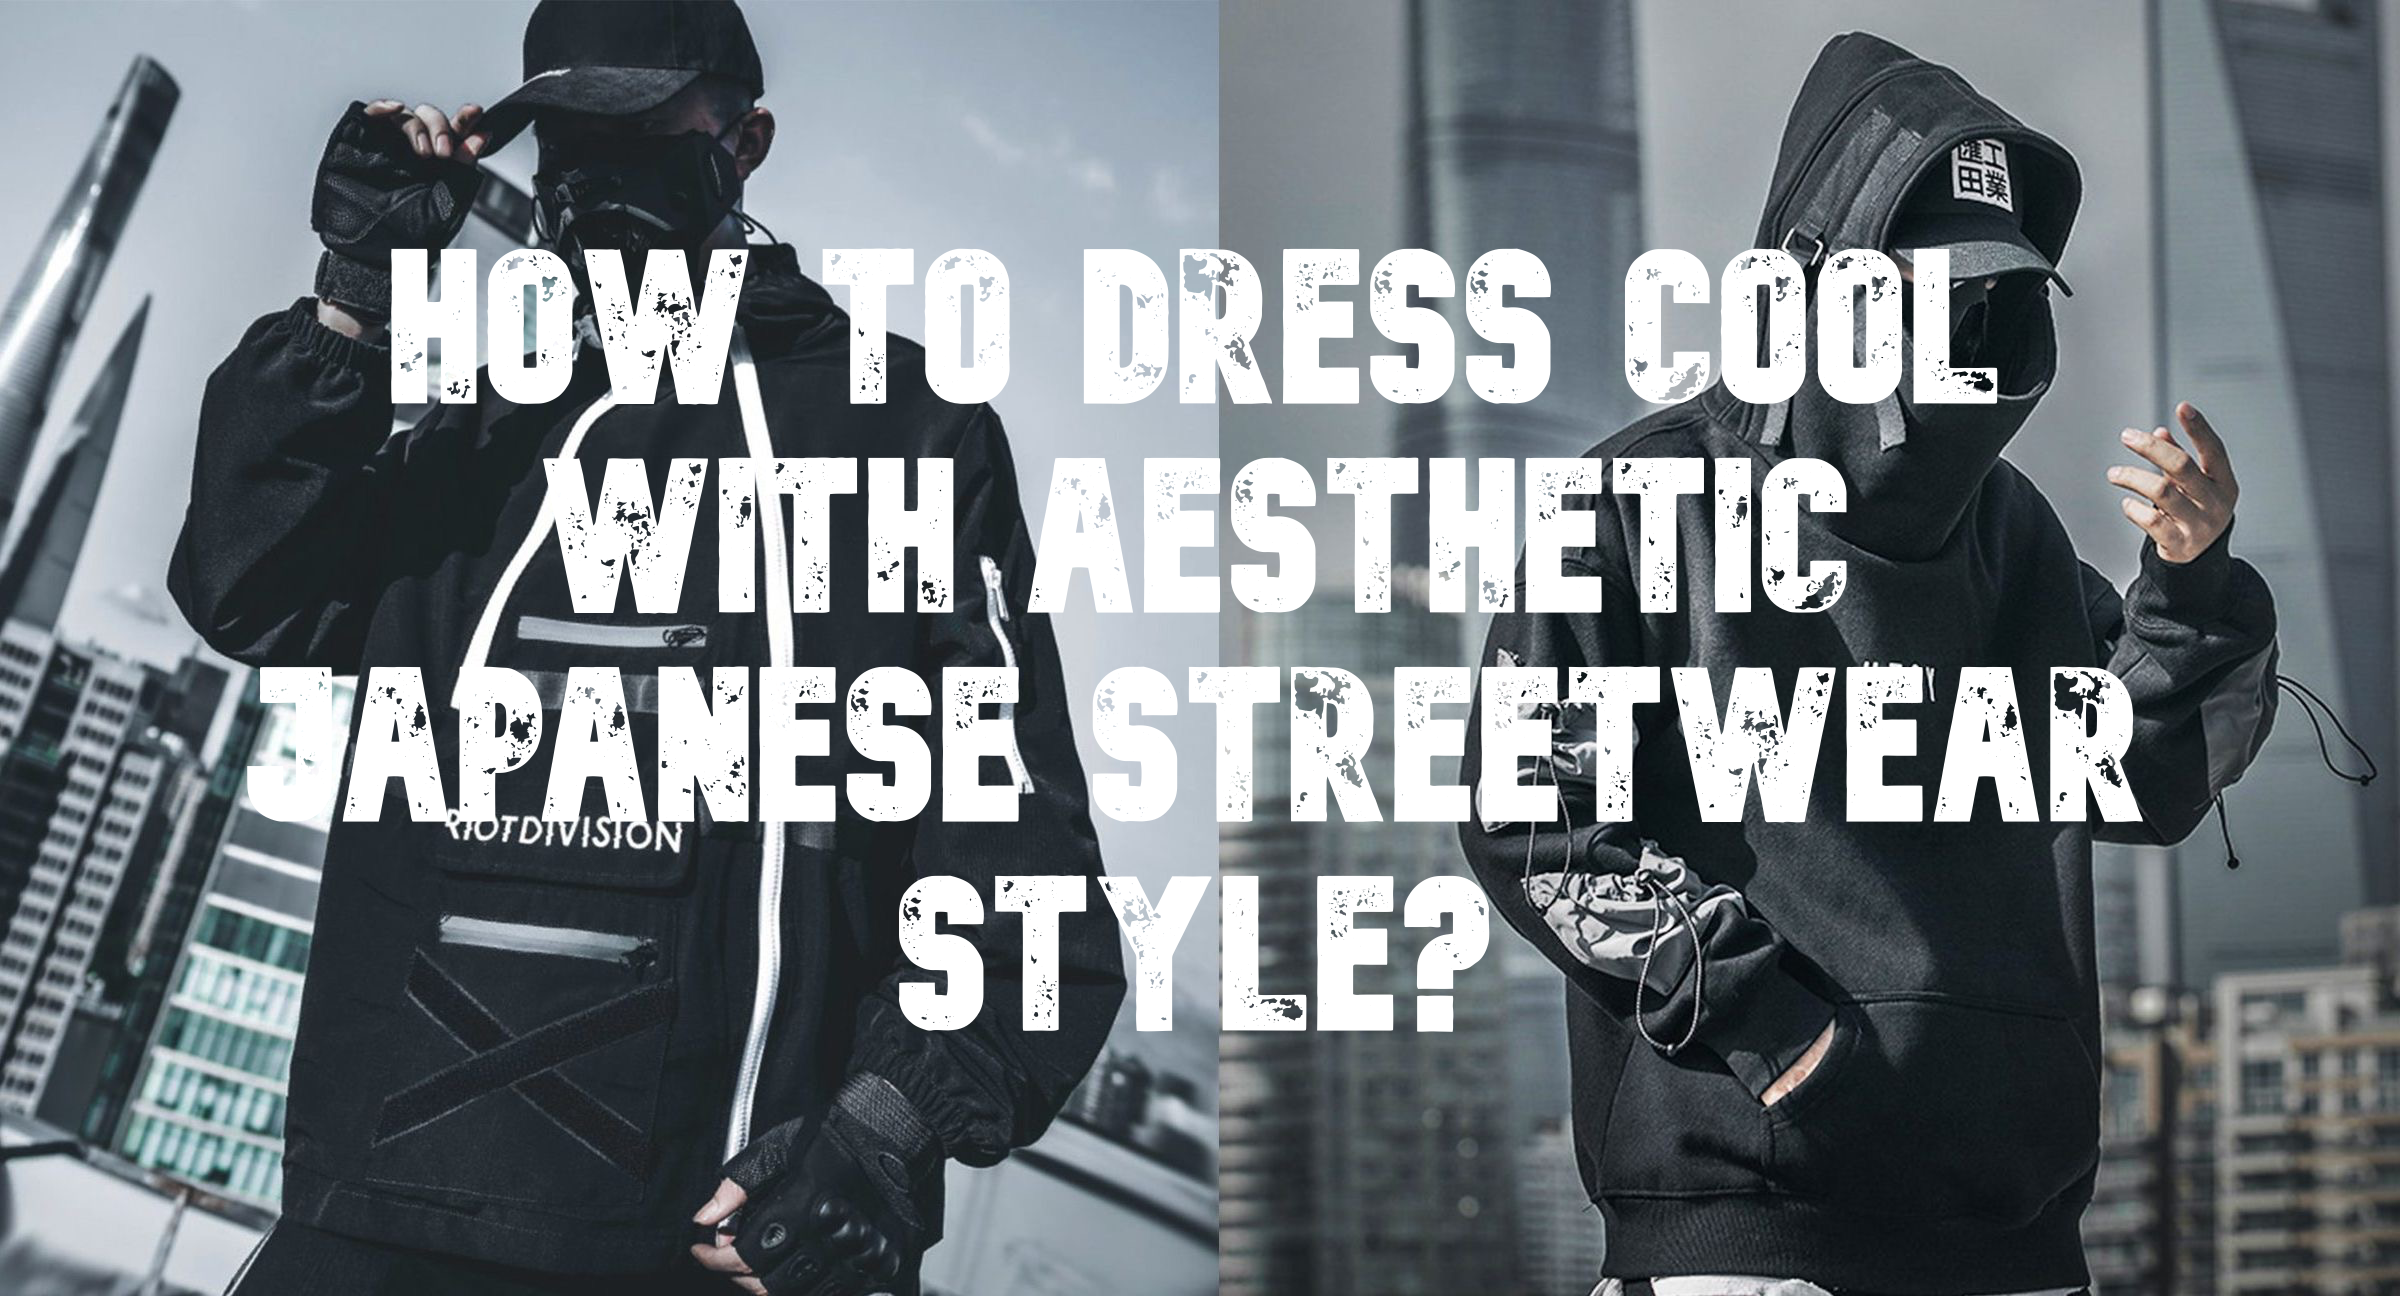 HOW TO DRESS COOL WITH AESTHETIC JAPANESE STREETWEAR STYLE?